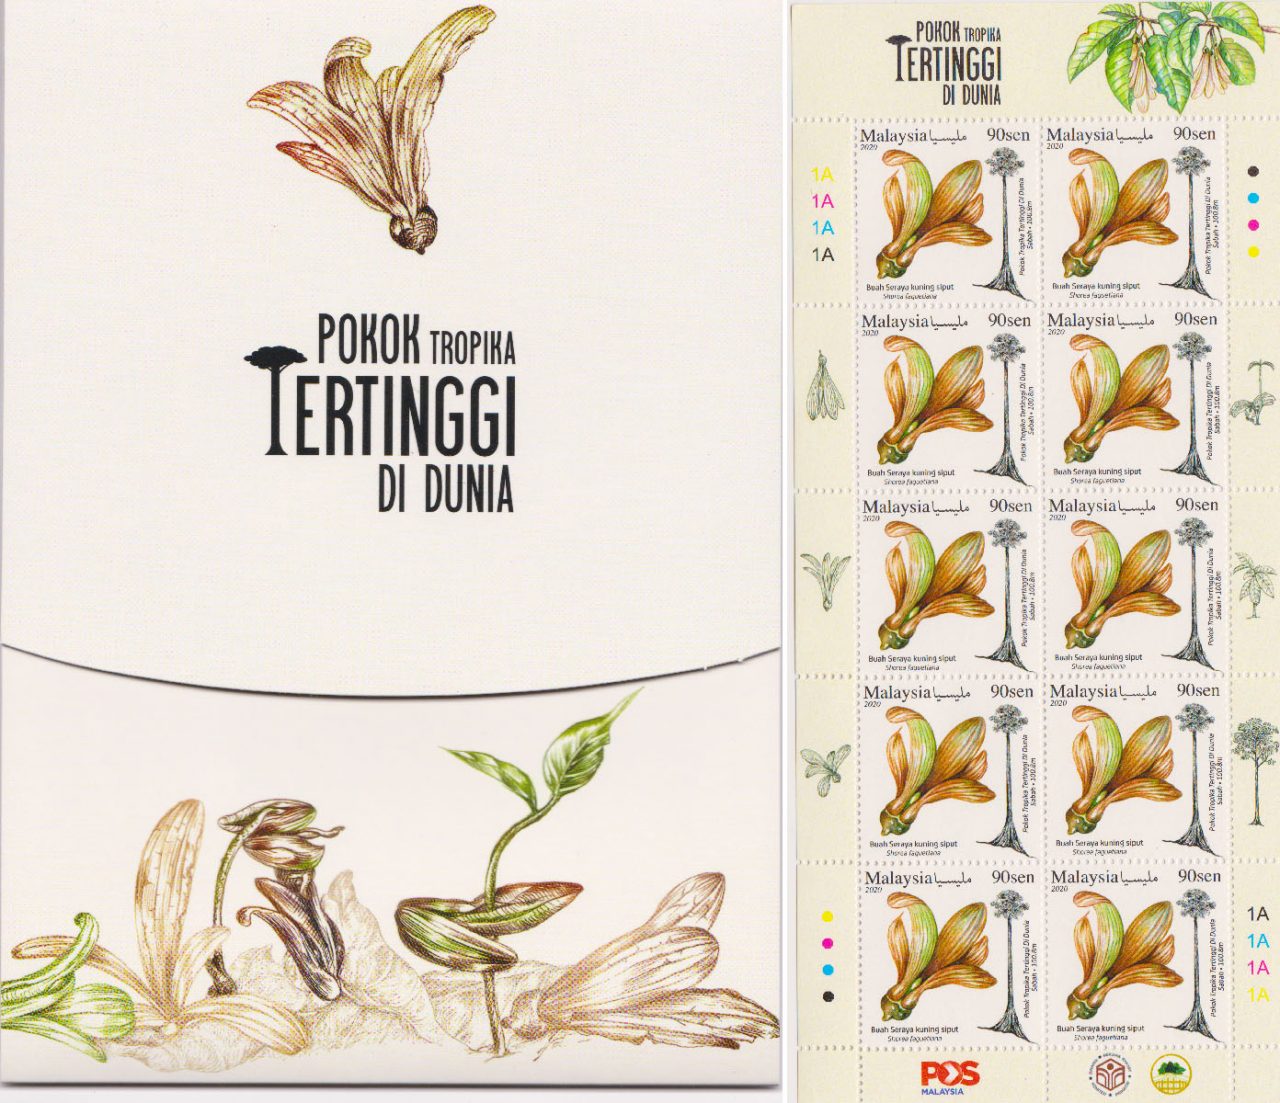 Left: the front cover of stamp folder of World's Tallest Tropical Tree (Pokok Tropika tertinggi di dunia). Right: Stamp sheet (10 pieces of 90-cent stamps). The picture in the stamp is the winged fruit of Shorea faguetiana